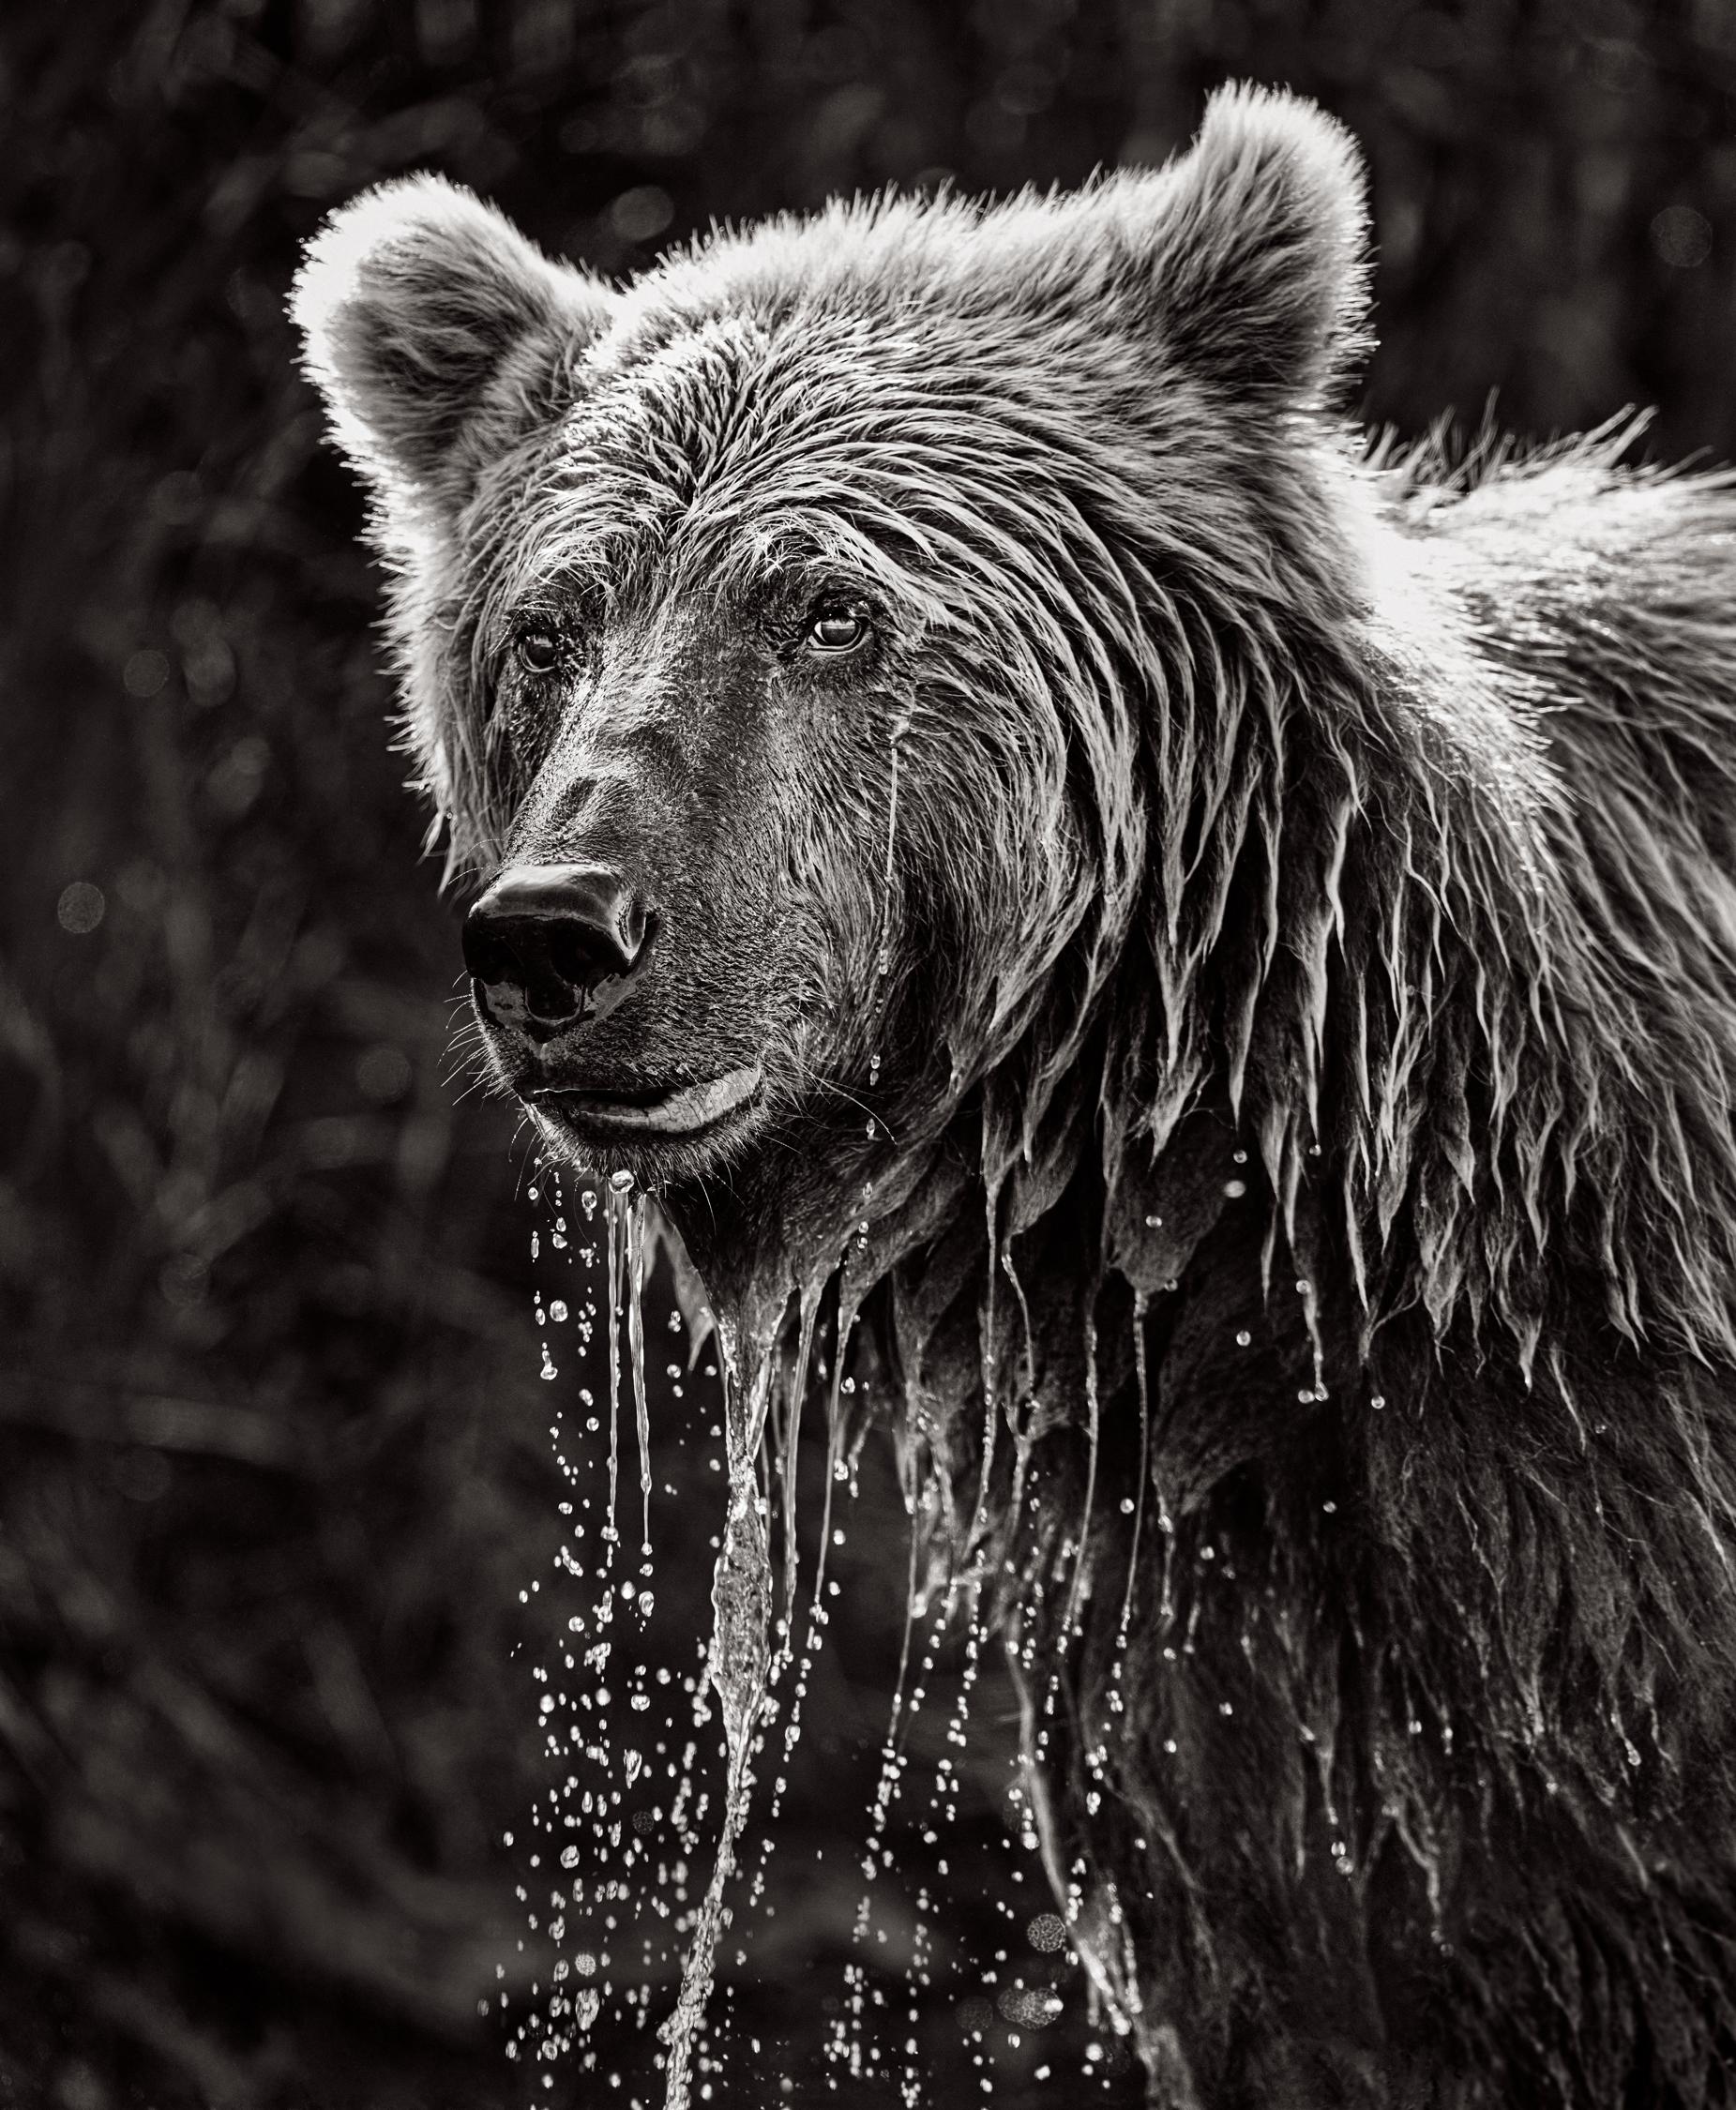 Drew Doggett Black and White Photograph – Brown Bear fotografiert den Moment An He Came Up For Air